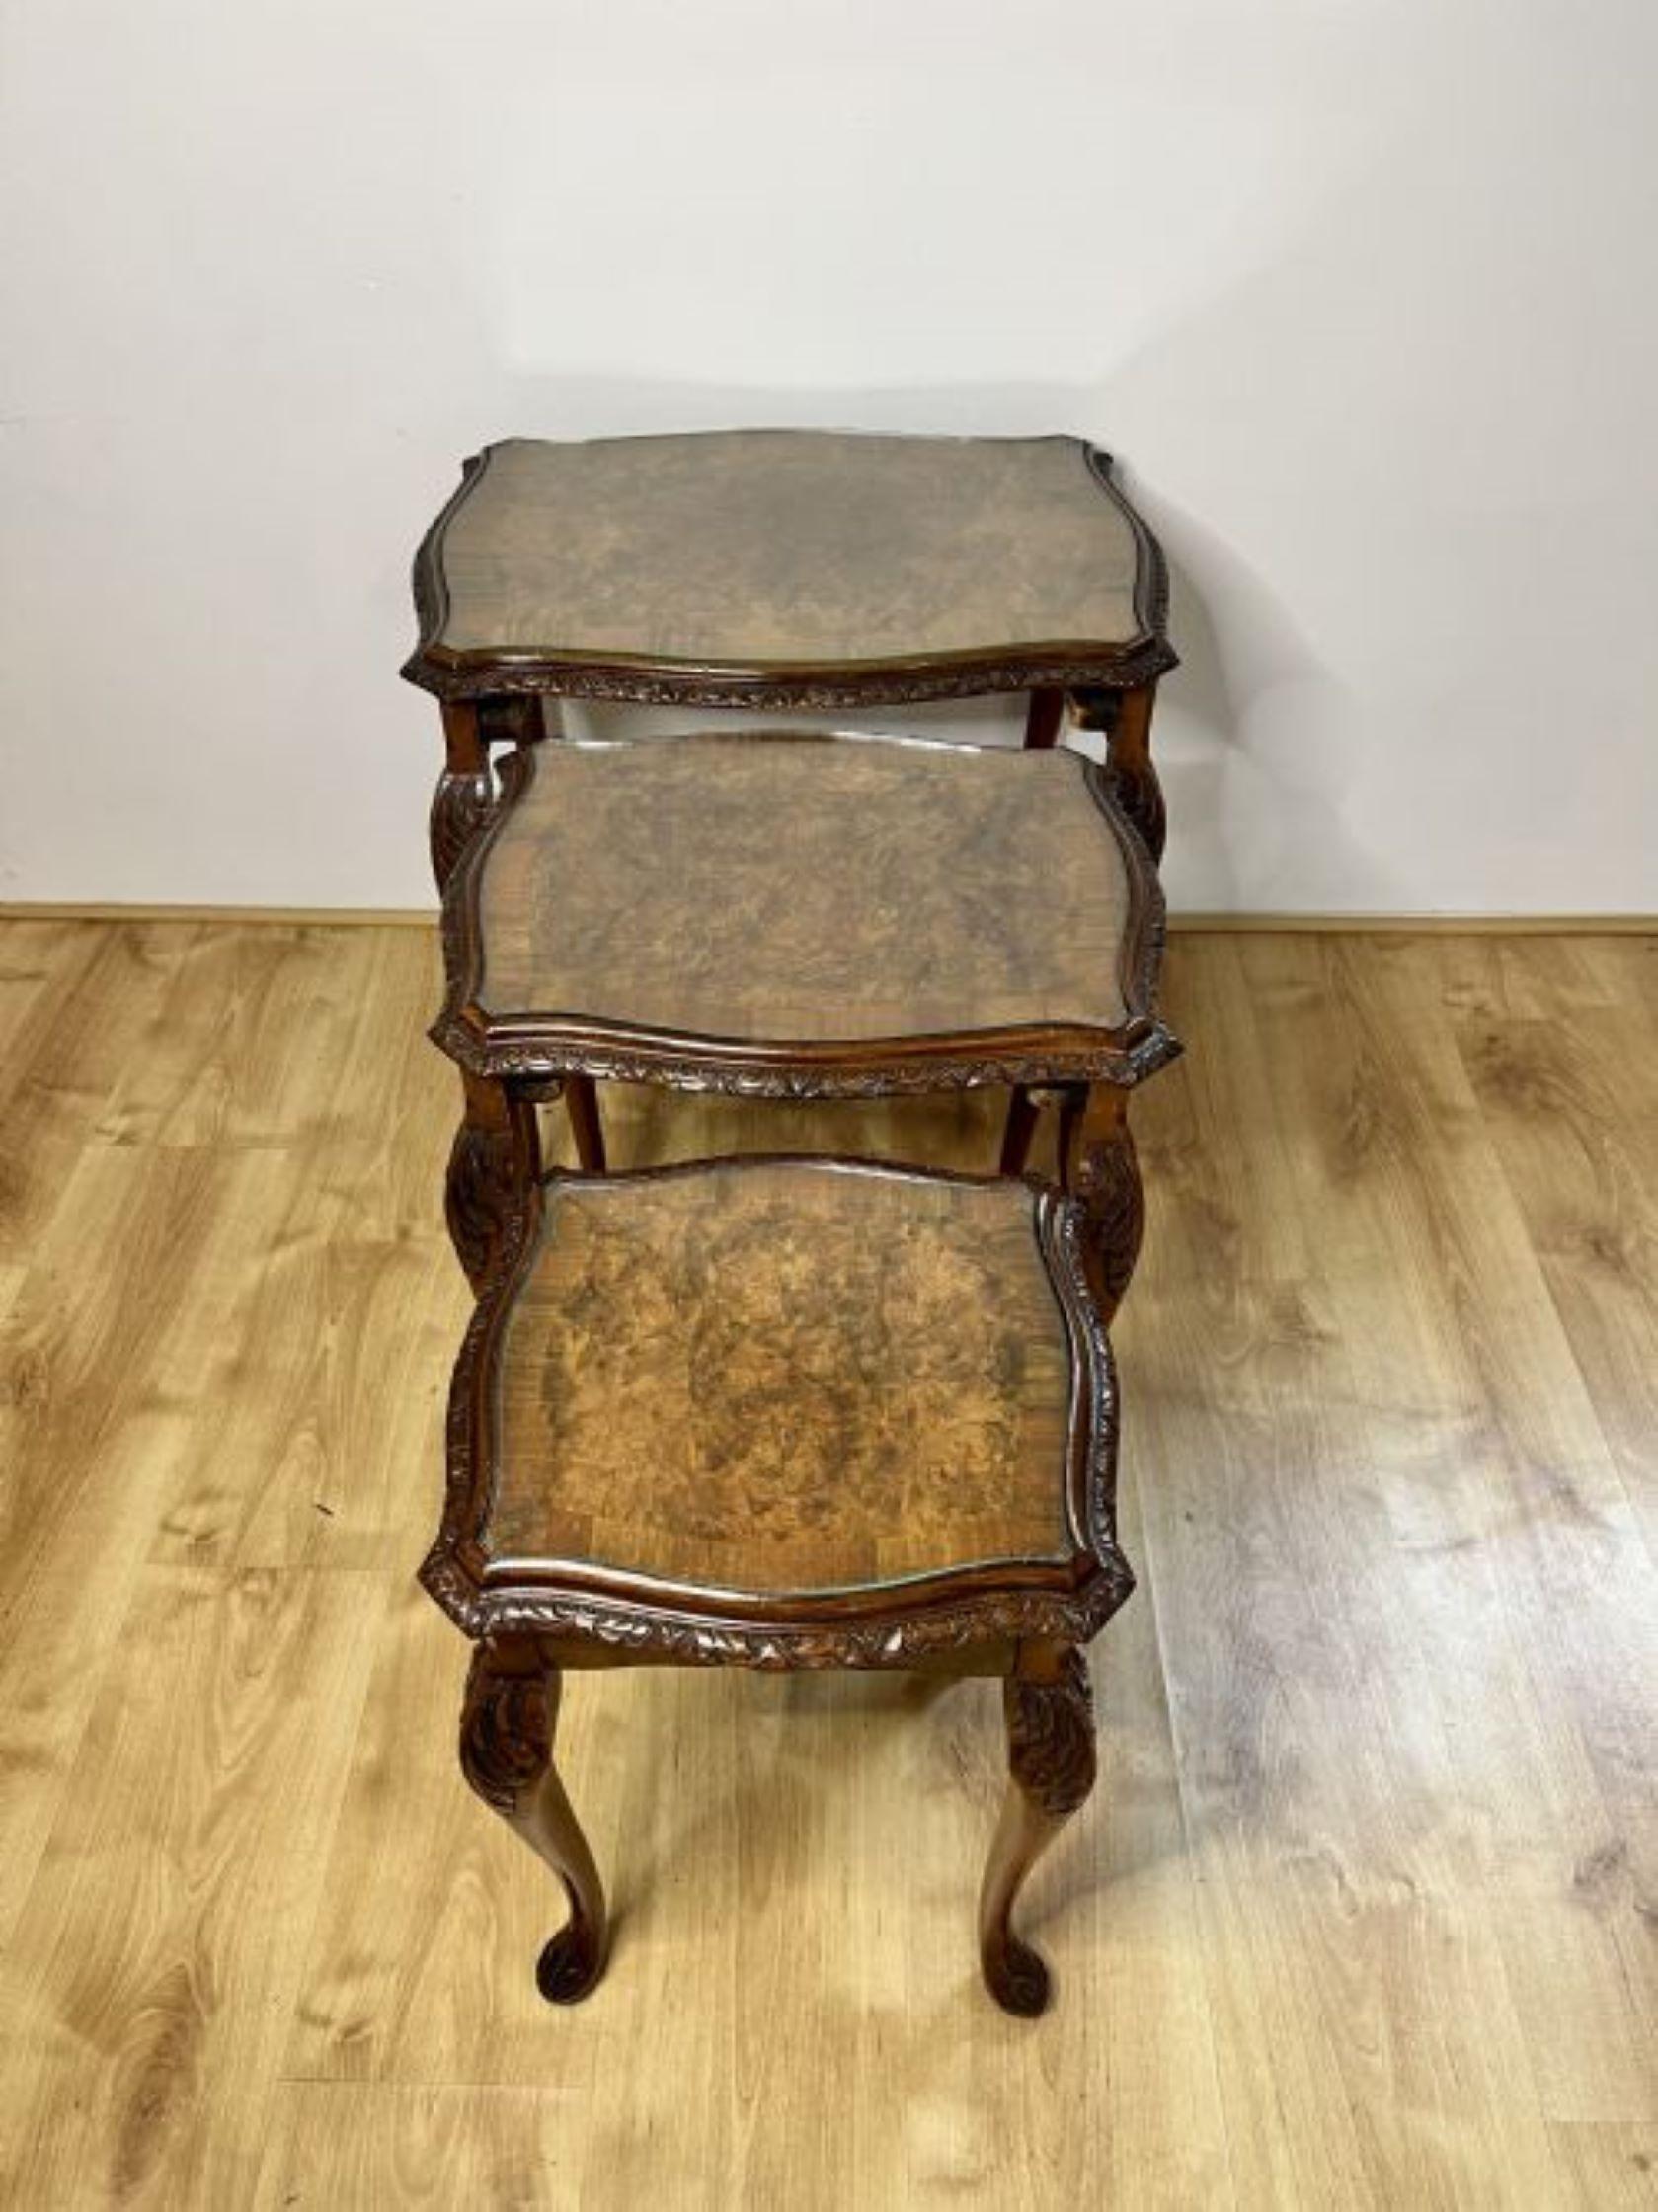 Outstanding quality antique burr walnut nest of three tables having outstanding quality burr walnut serpentine shaped tops with a carved edge, standing on carved solid walnut shaped cabriole legs with carved scroll feet. 
Beautifully crafted and